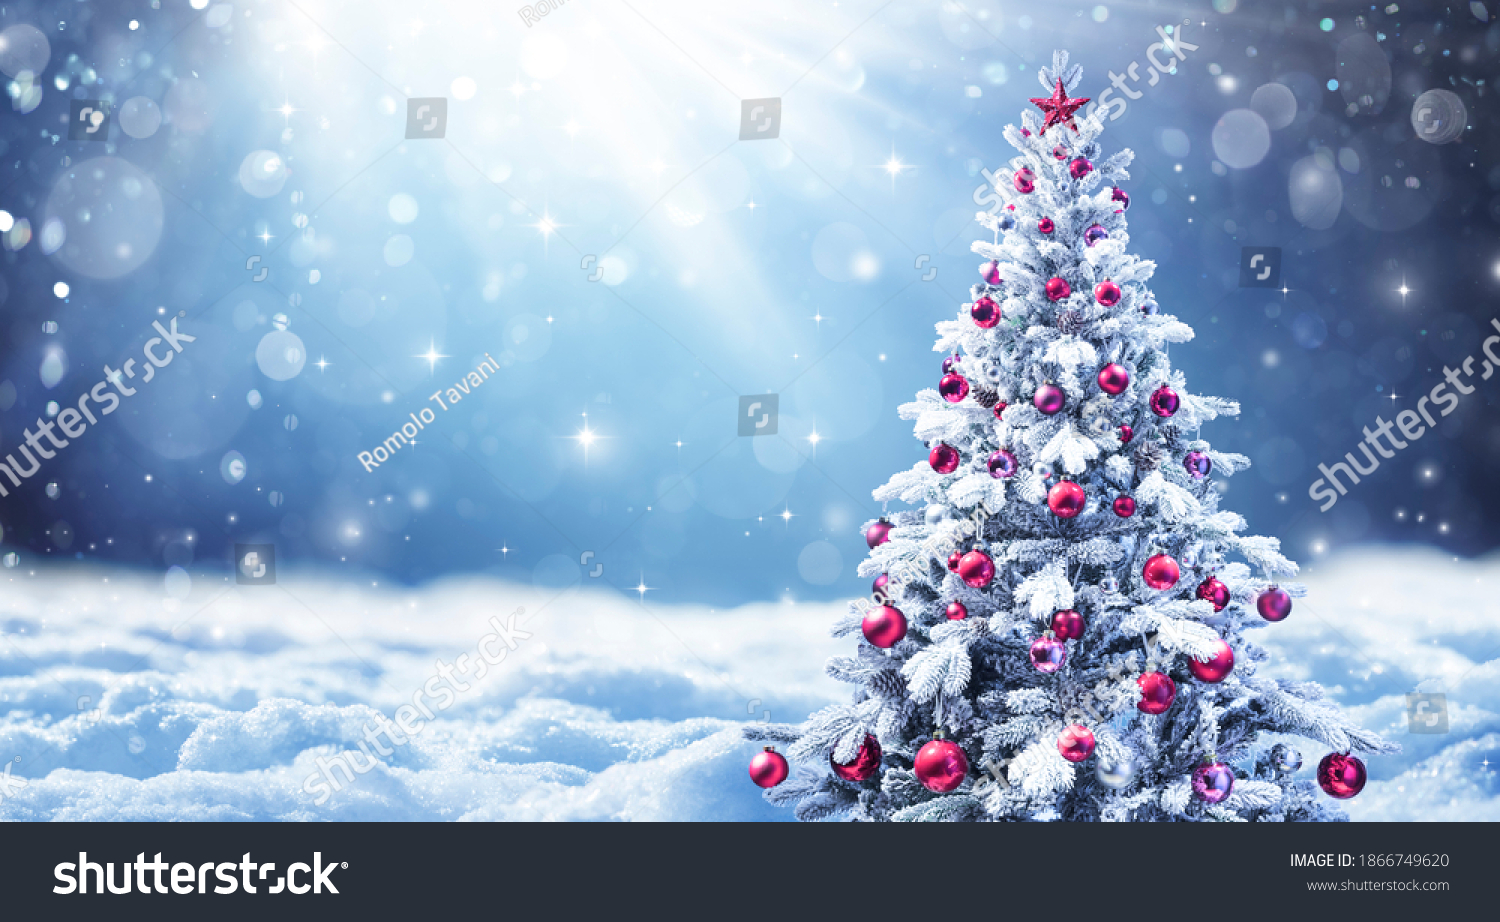 Snowy Christmas Tree With Red Balls In A Abstract Defocused Landscape
 #1866749620